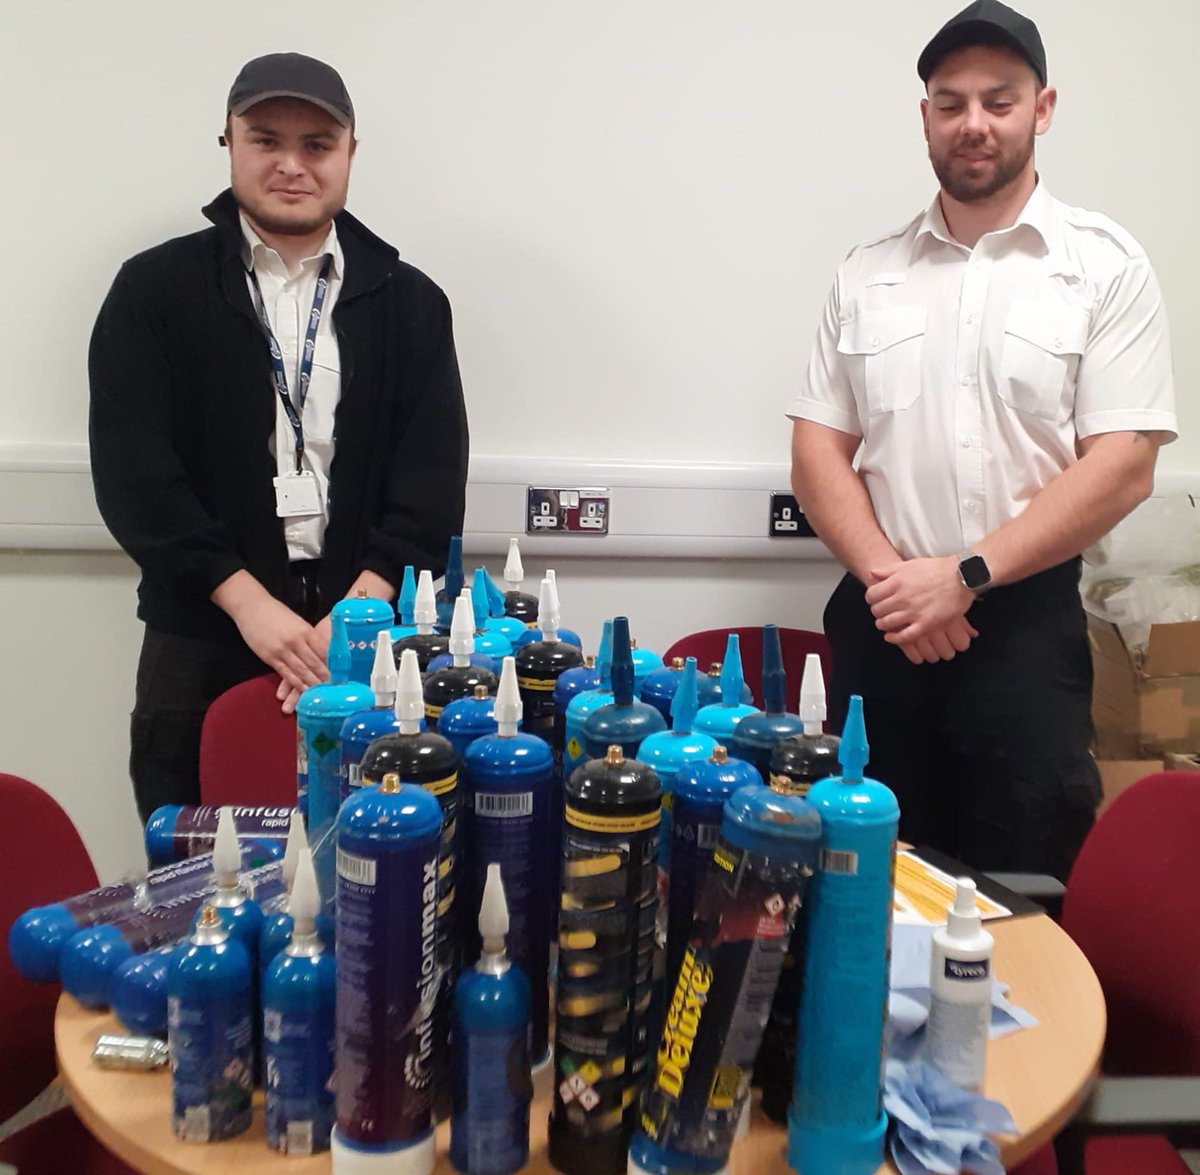 As a result of joint working, Community Safety Wardens retrieved a large quantity of nitrous oxide canisters from the Blackwood arena yesterday. #KeepingCommunitiesSafer #SaferCaerphilly